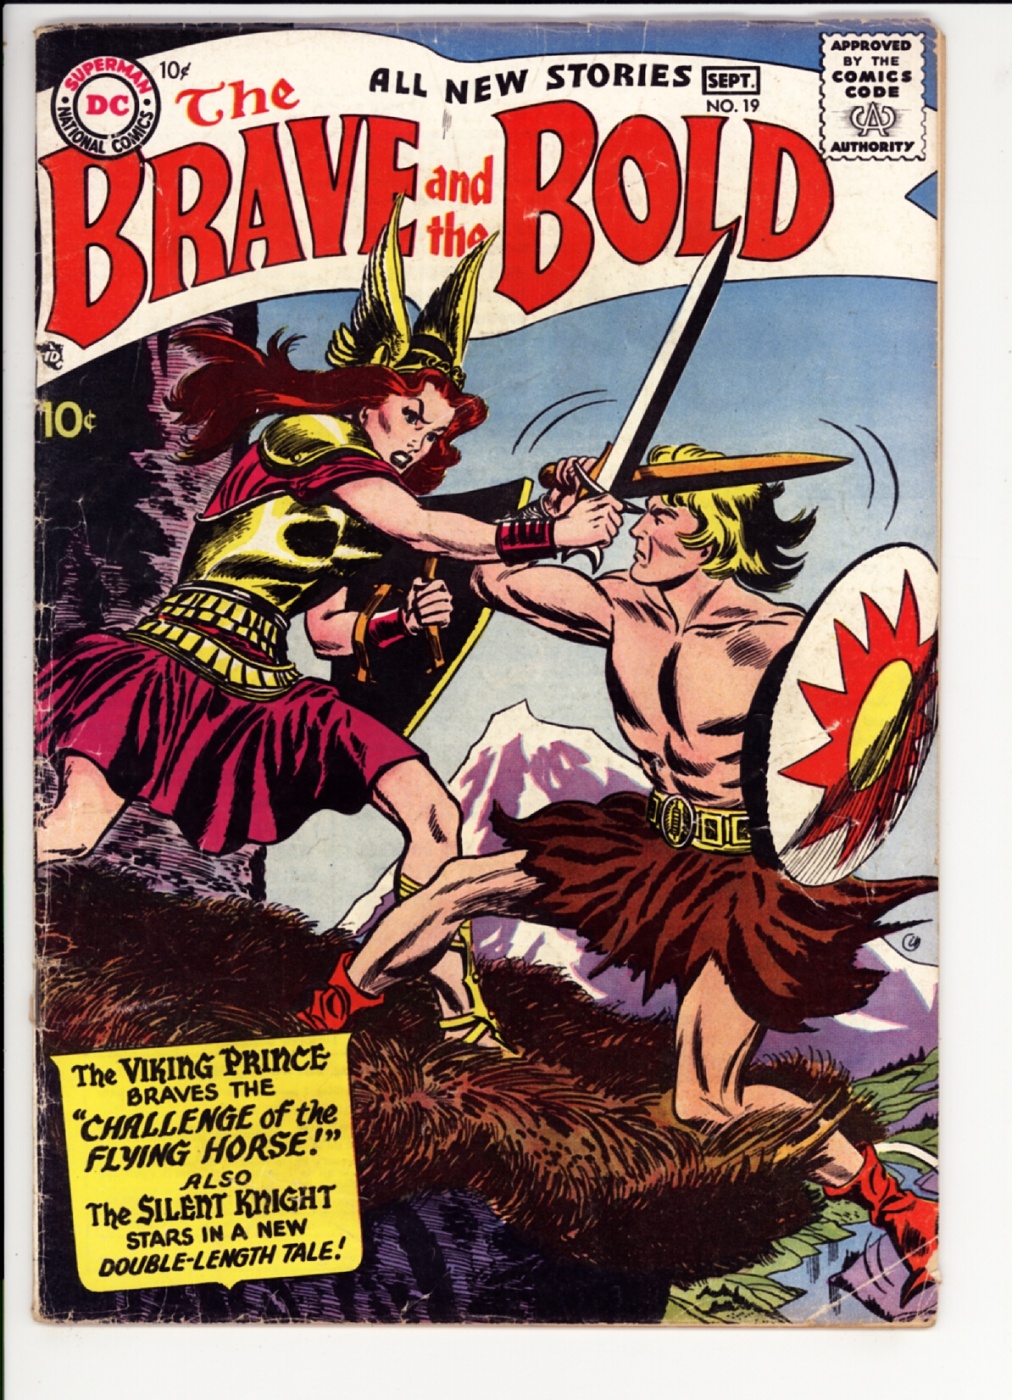 The Brave and the Bold Issue # 143 (DC Comics)